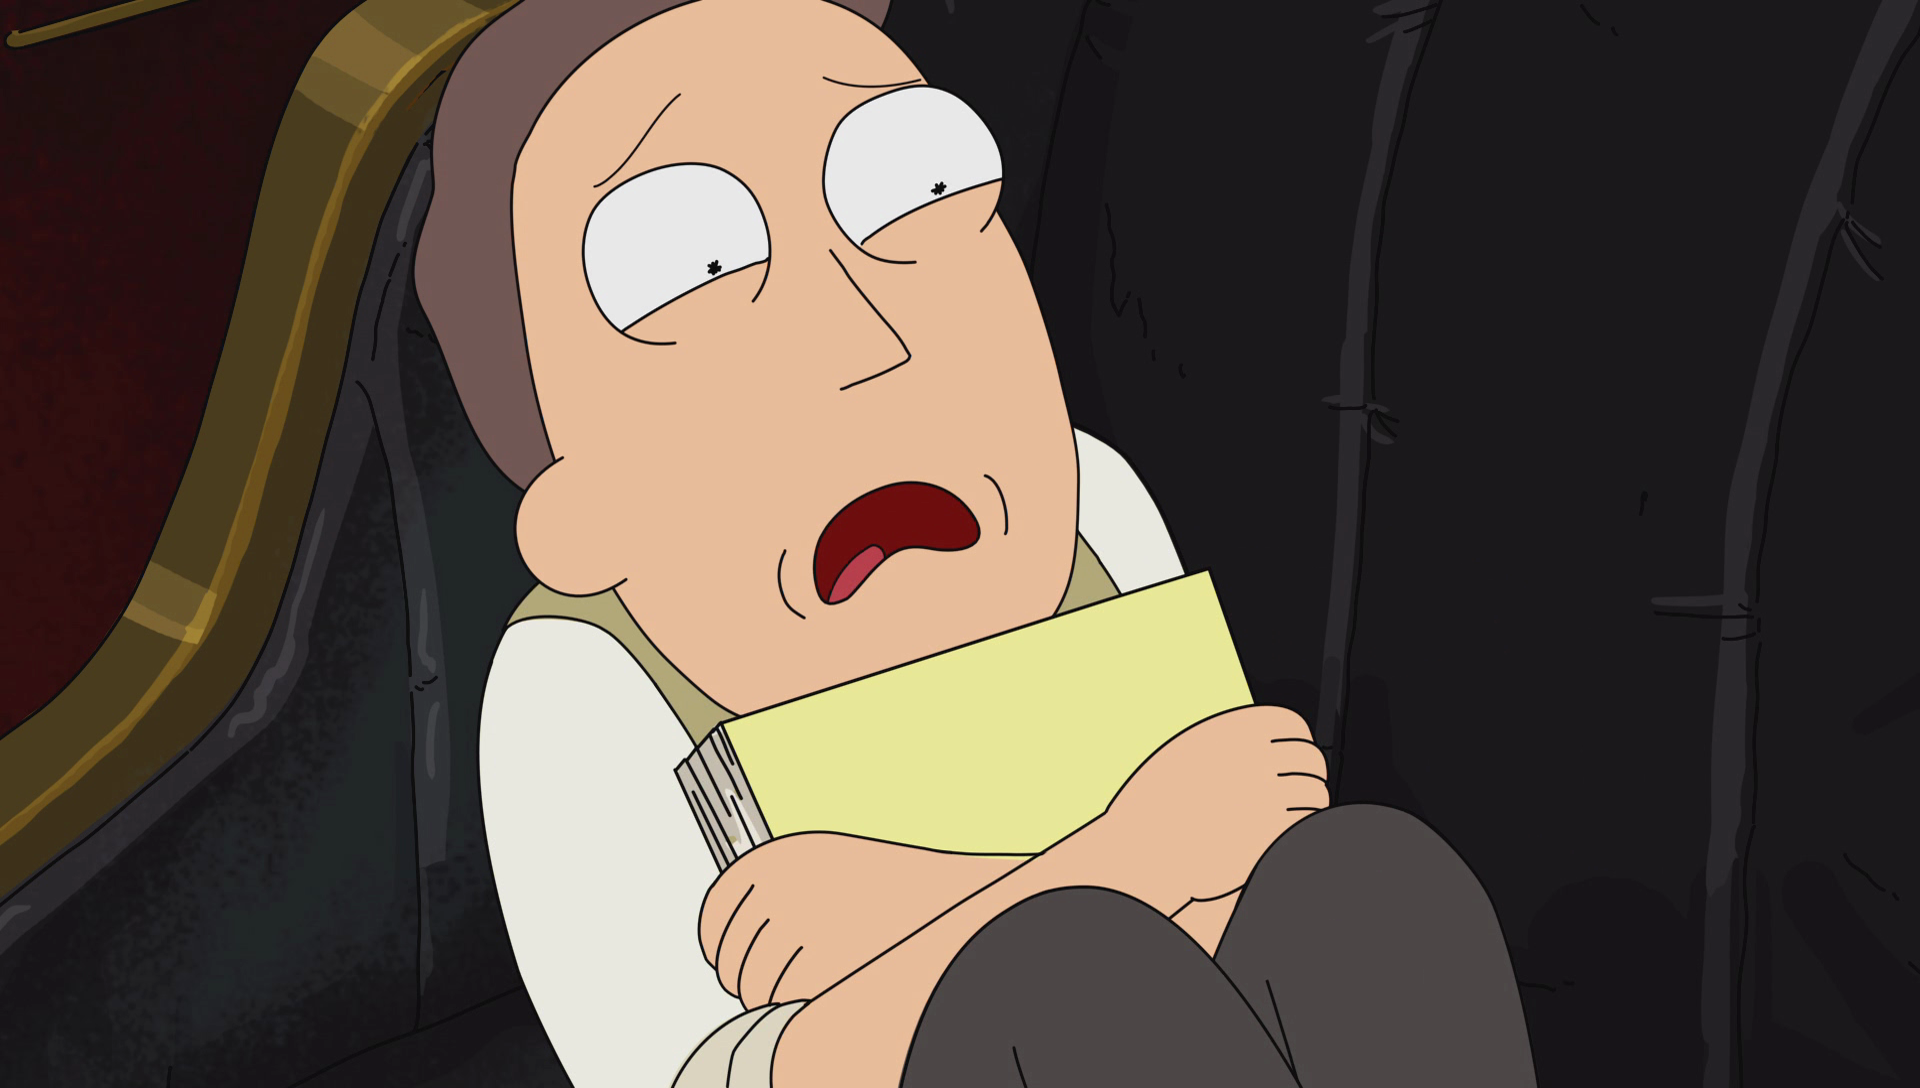 Image S1e11 Jerry Scared Png Rick And Morty Wiki